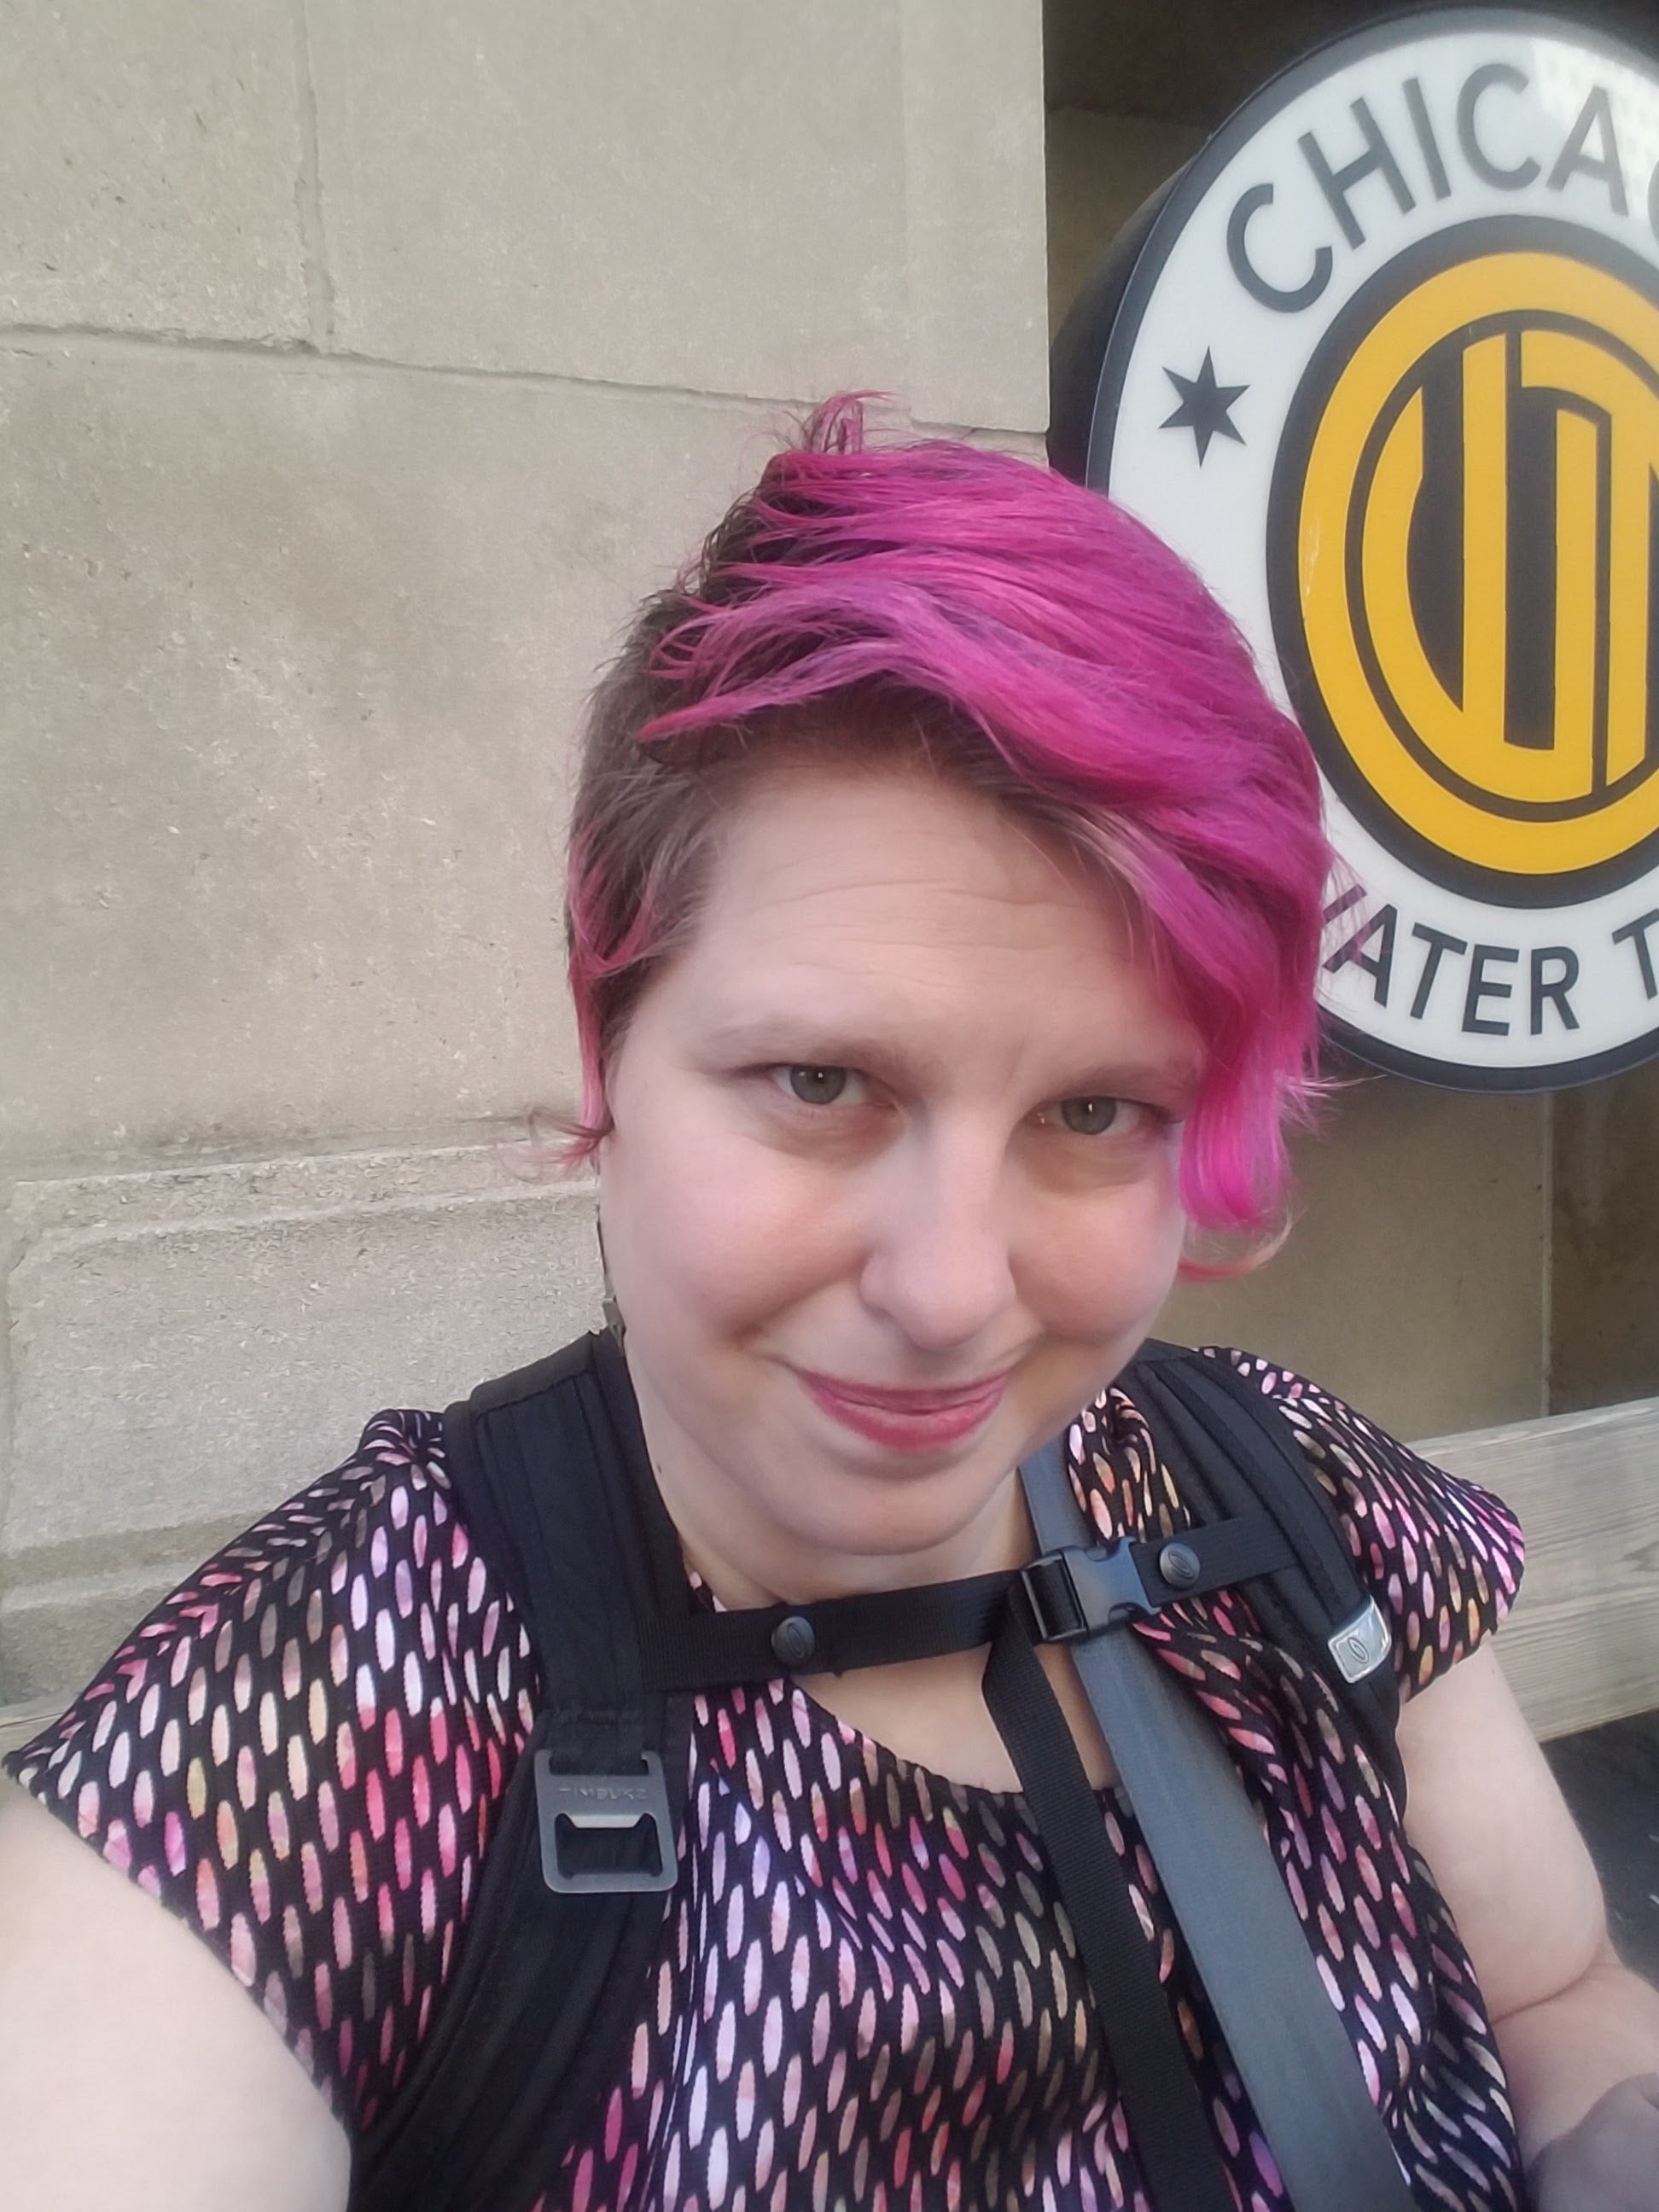 A pink-haired woman with a half-smile looks directly into the camera.